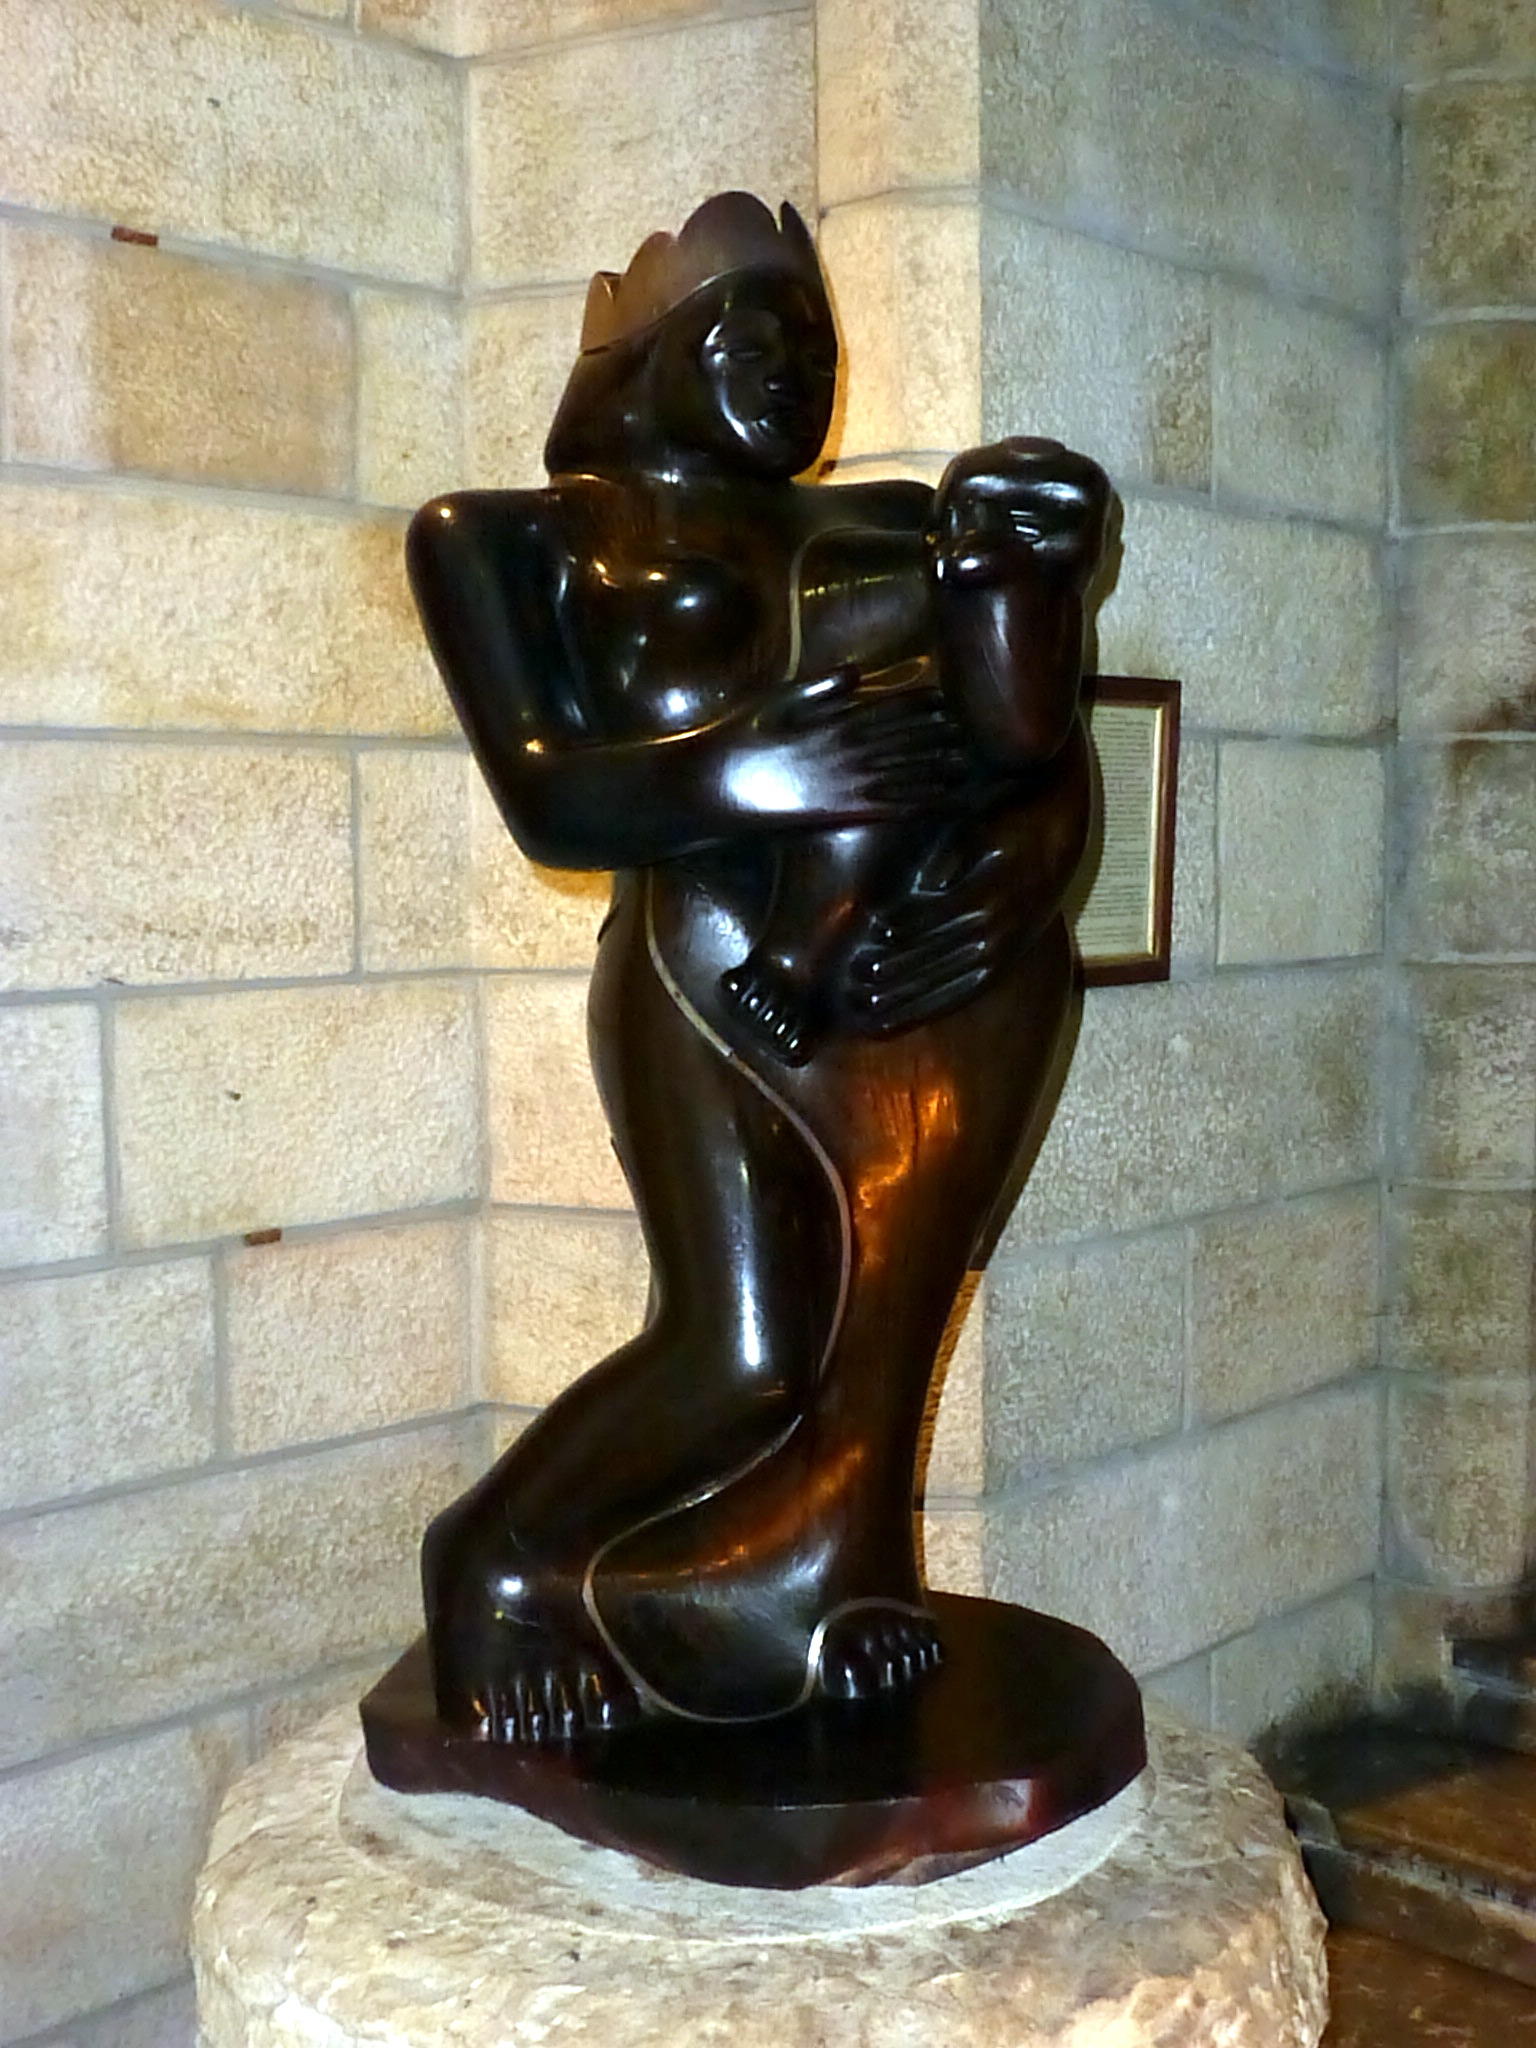 The African Madonna Carved in Lignum Vitae Wood by Leon Underwood